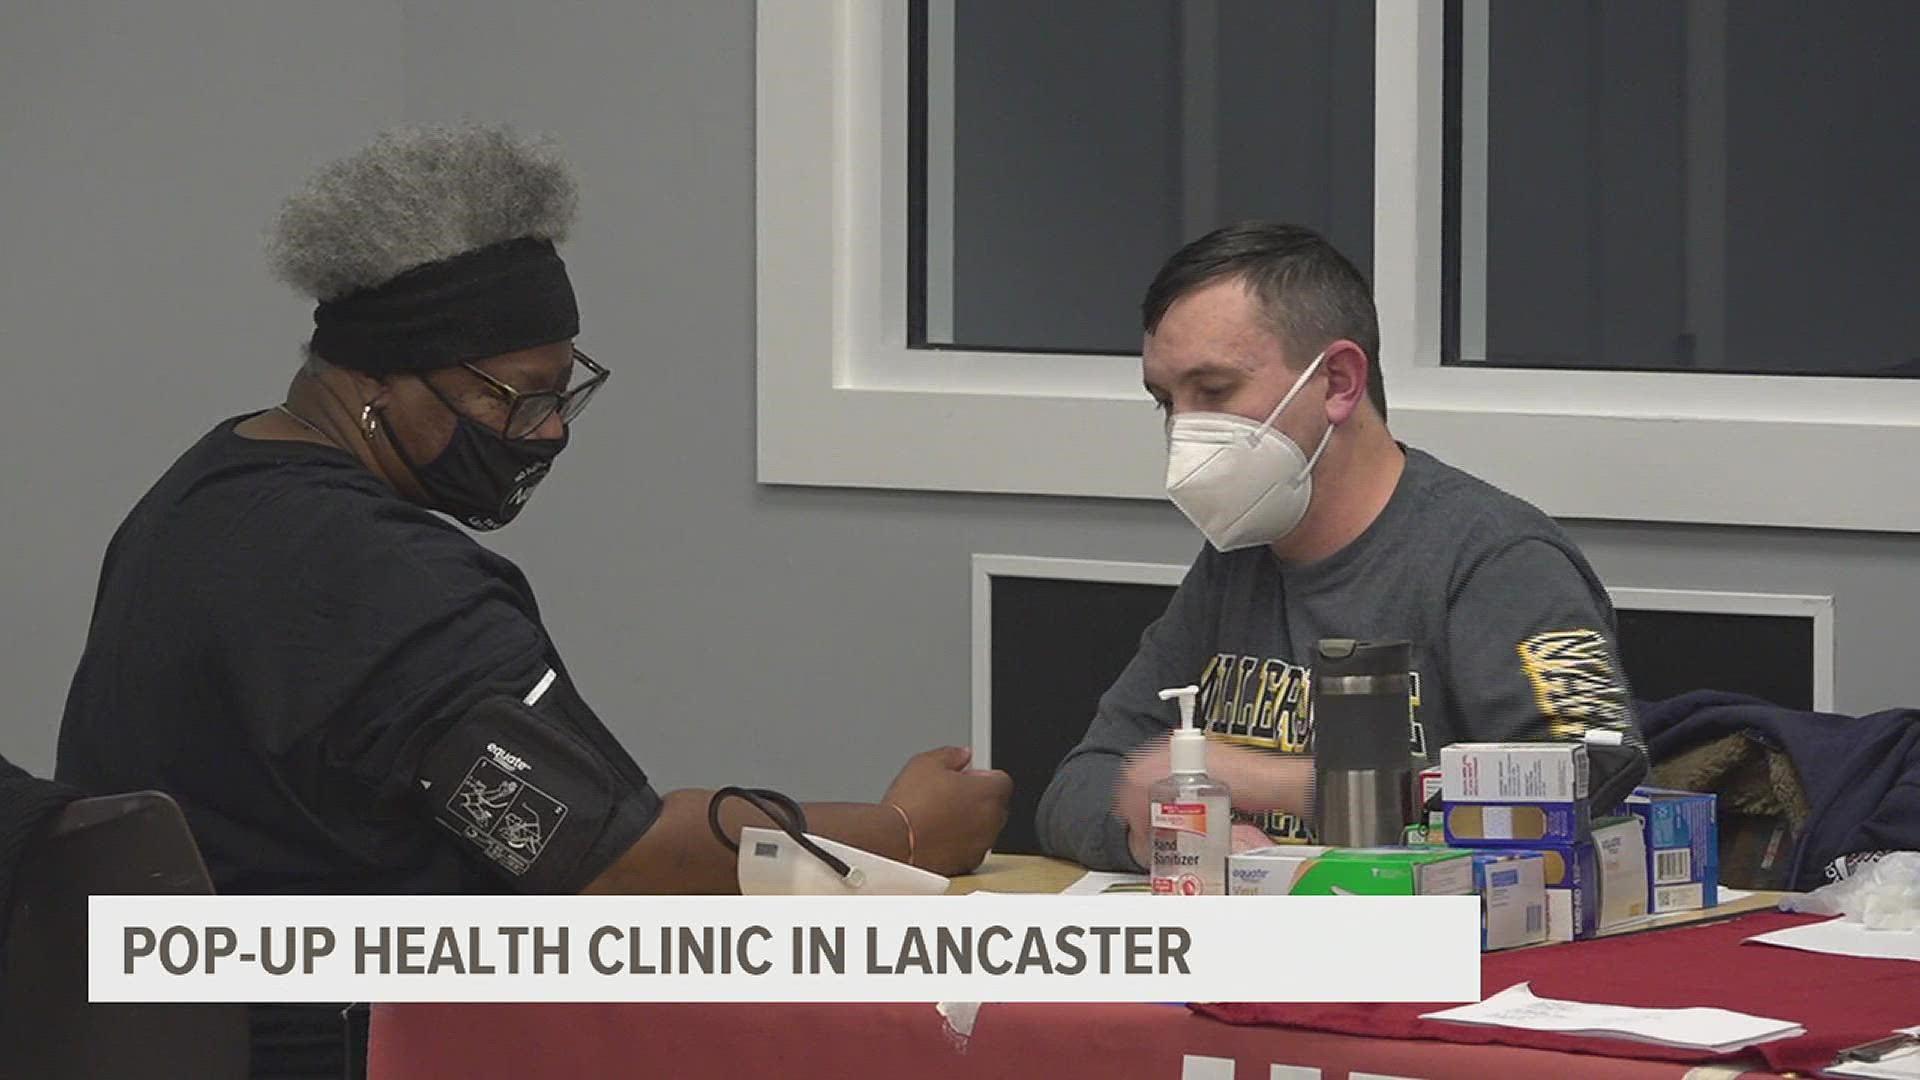 Officials with the clinic say its goal was to help people who need it most.